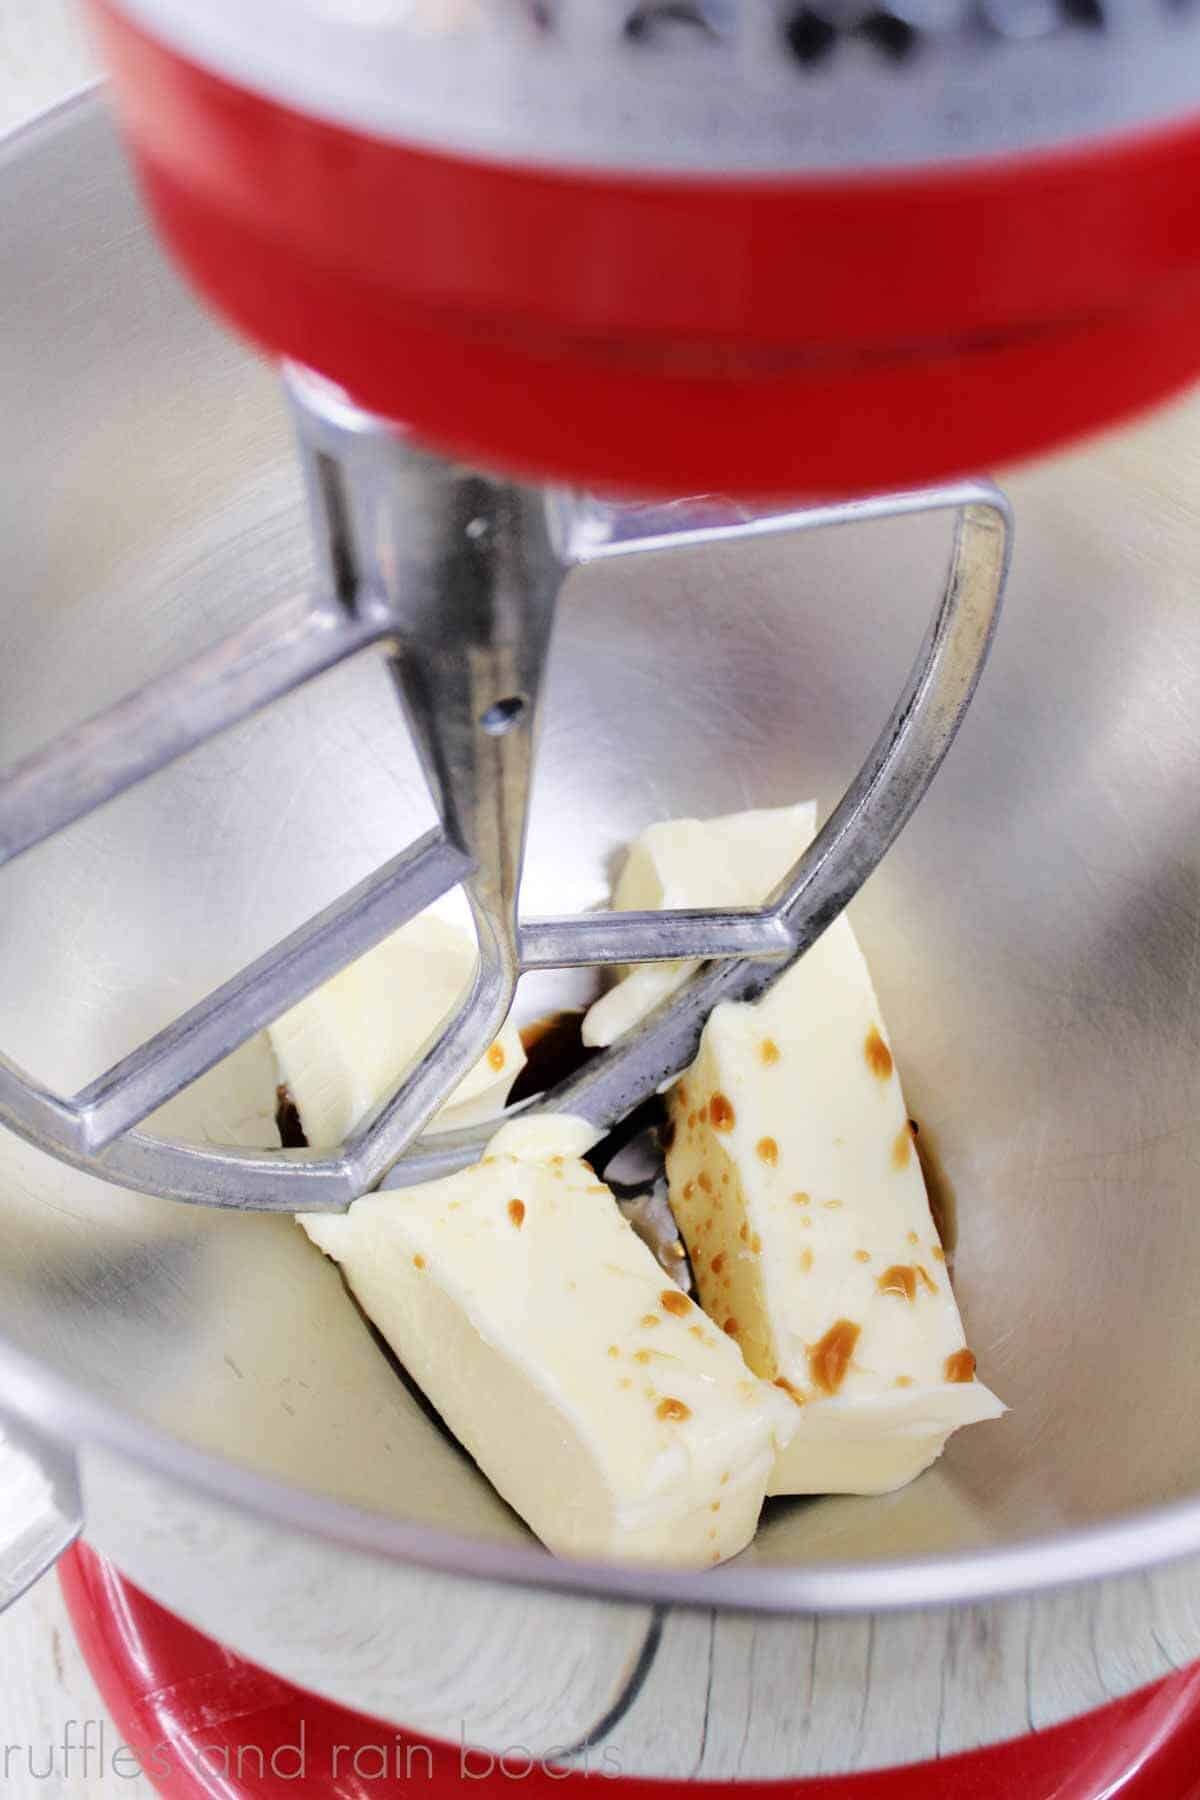 Vertical image of Irish butter and vanilla extract in bowl of red stand mixer with paddle attachment.